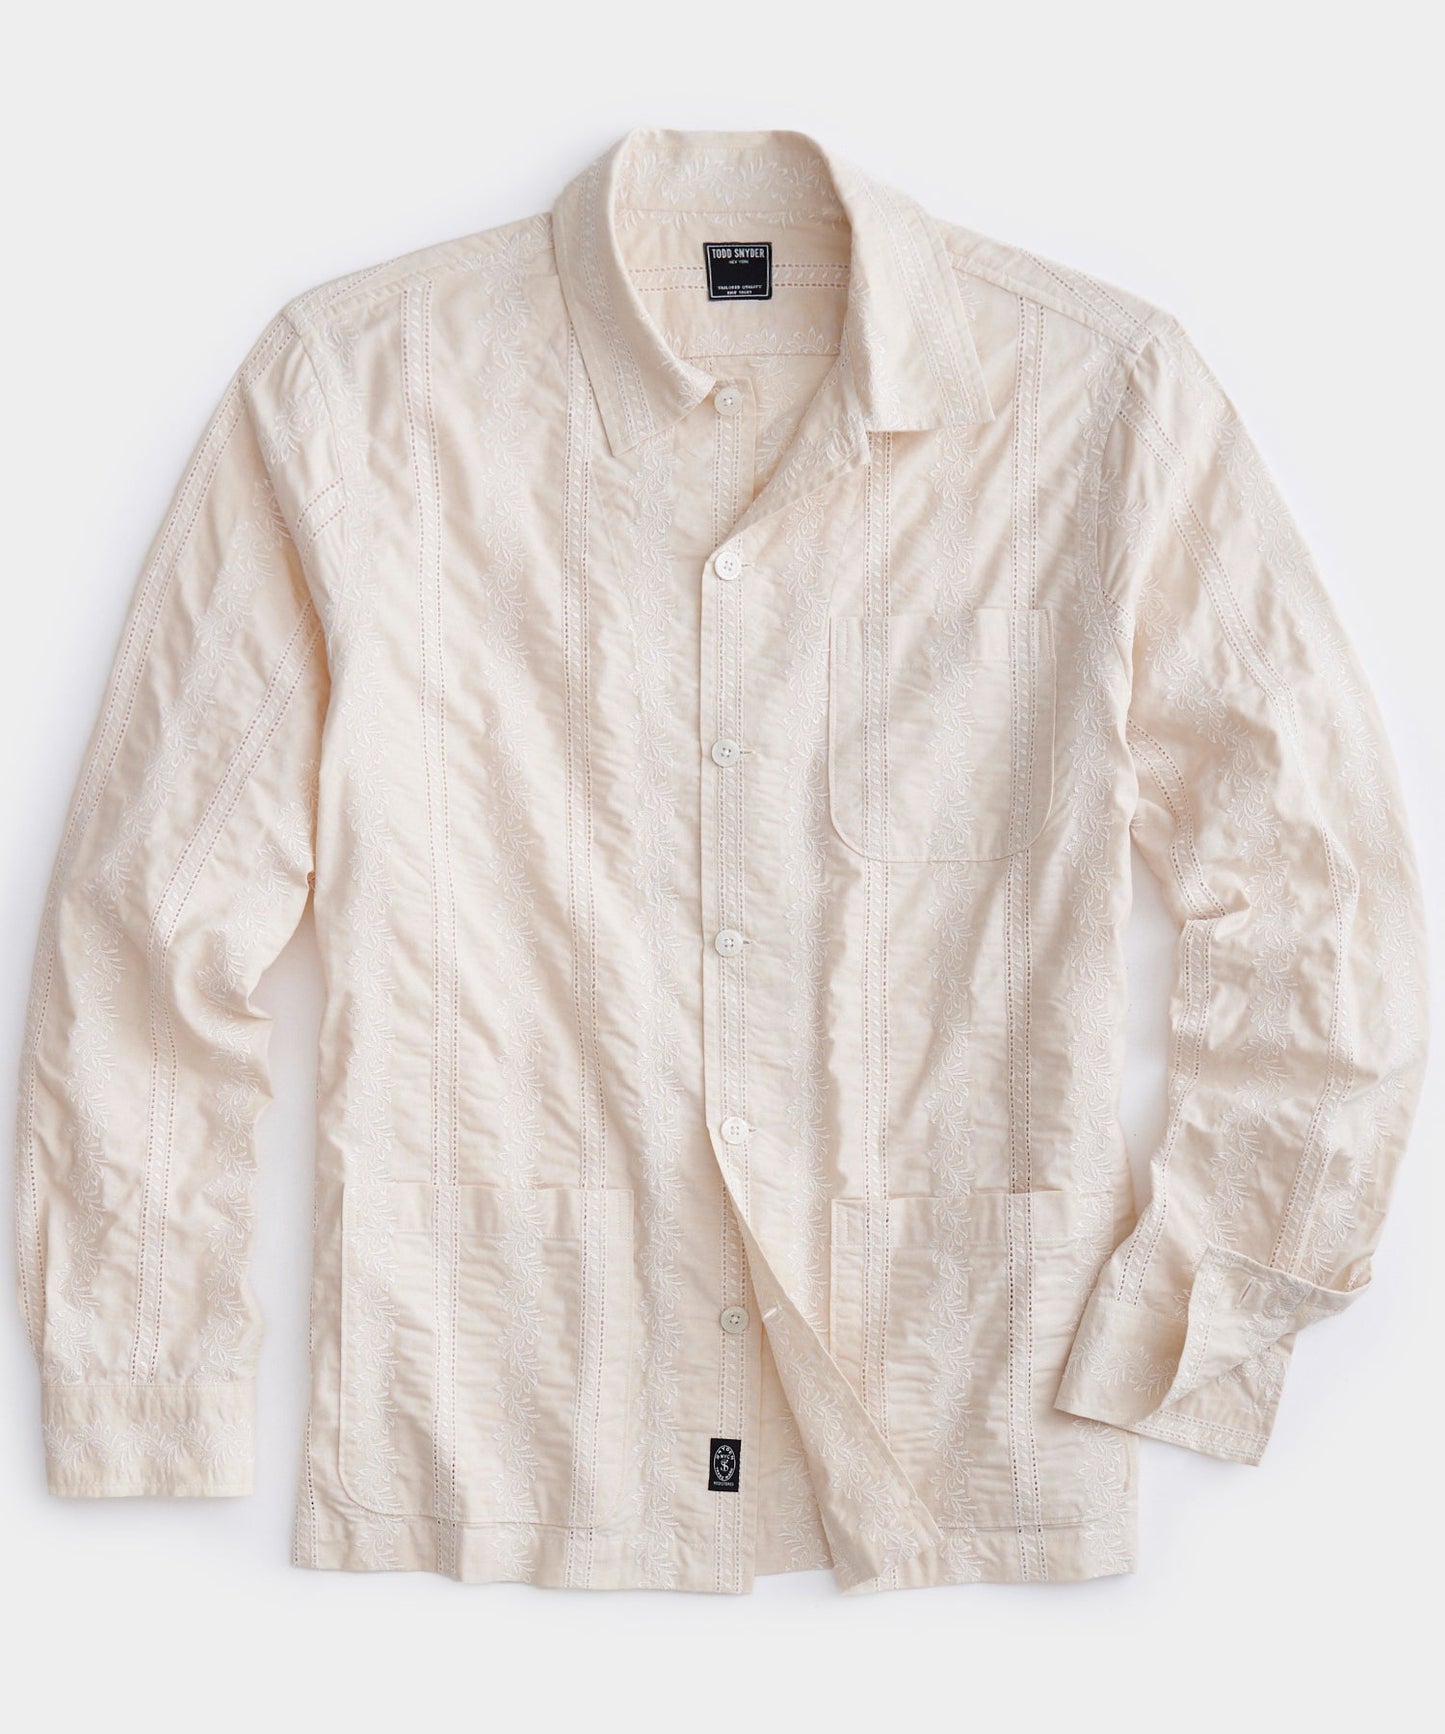 Todd Snyder - TODD SNYDER JAPANESE FLORAL VINE CHORE SHIRT IN NATURAL - Rent With Thred